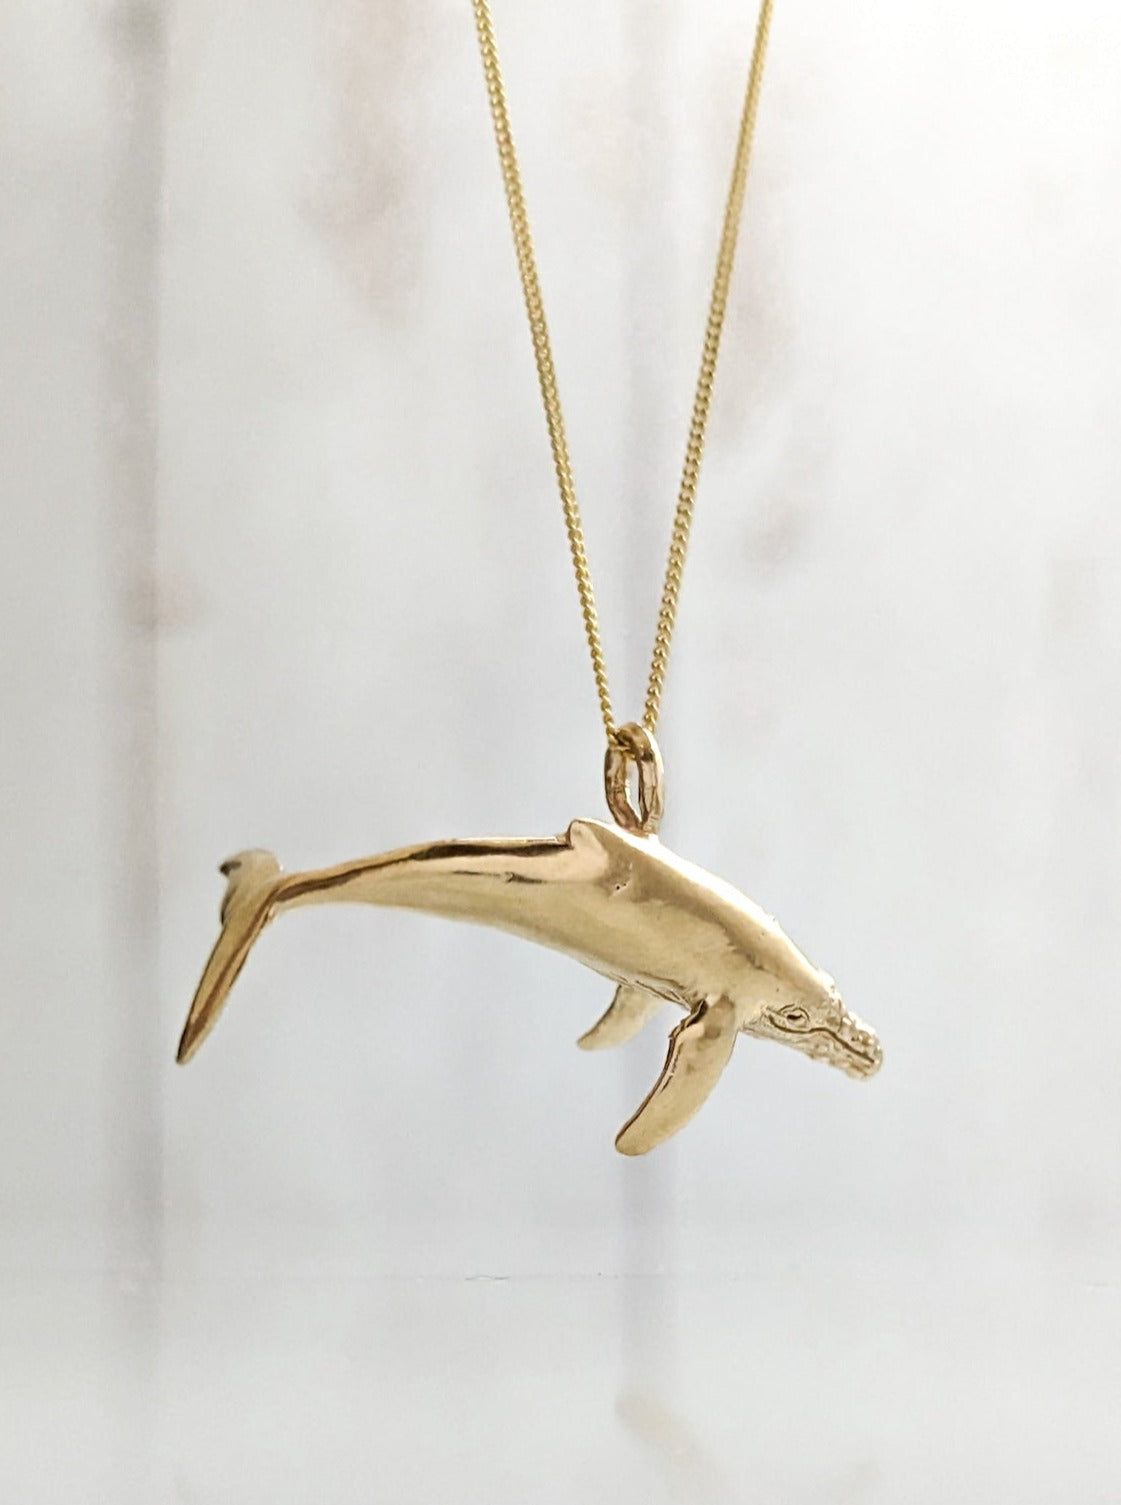 Accurate and realistic 3D humpback whale charm